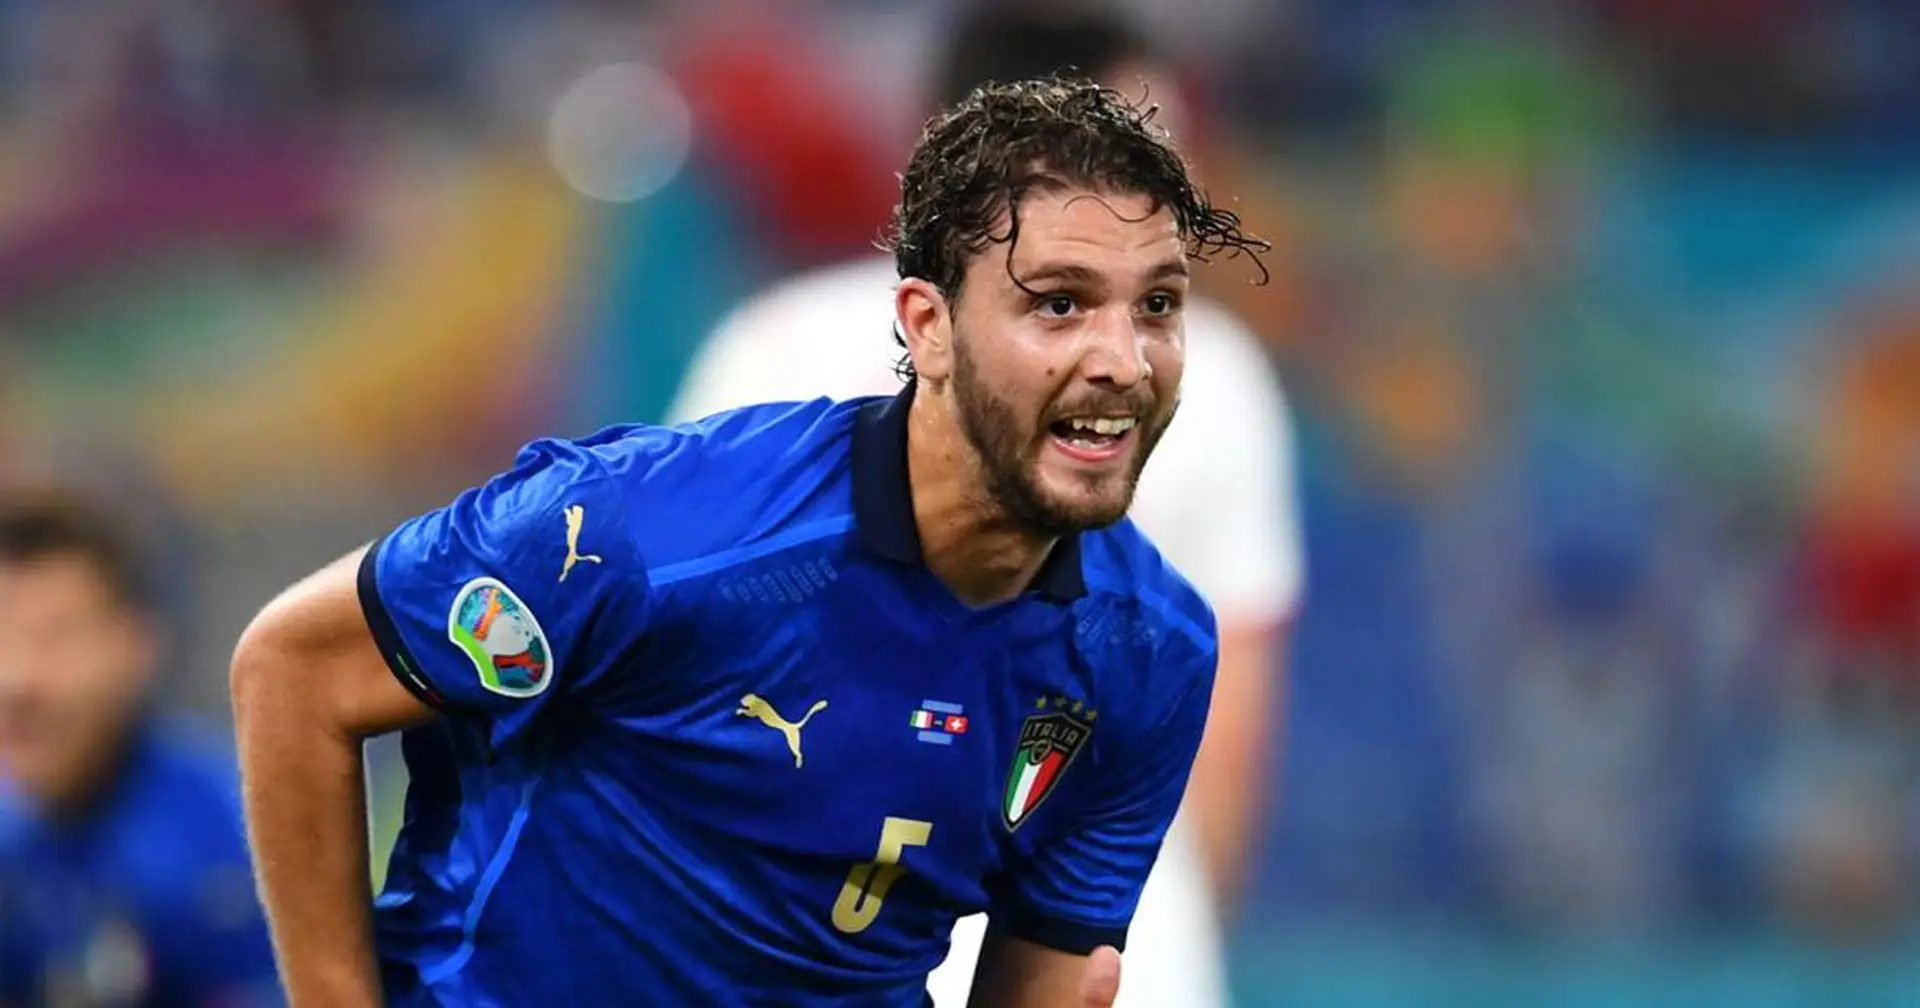 'Locatelli, what a player!': Man United fans in awe of Italy international after monster Euro 2020 display 